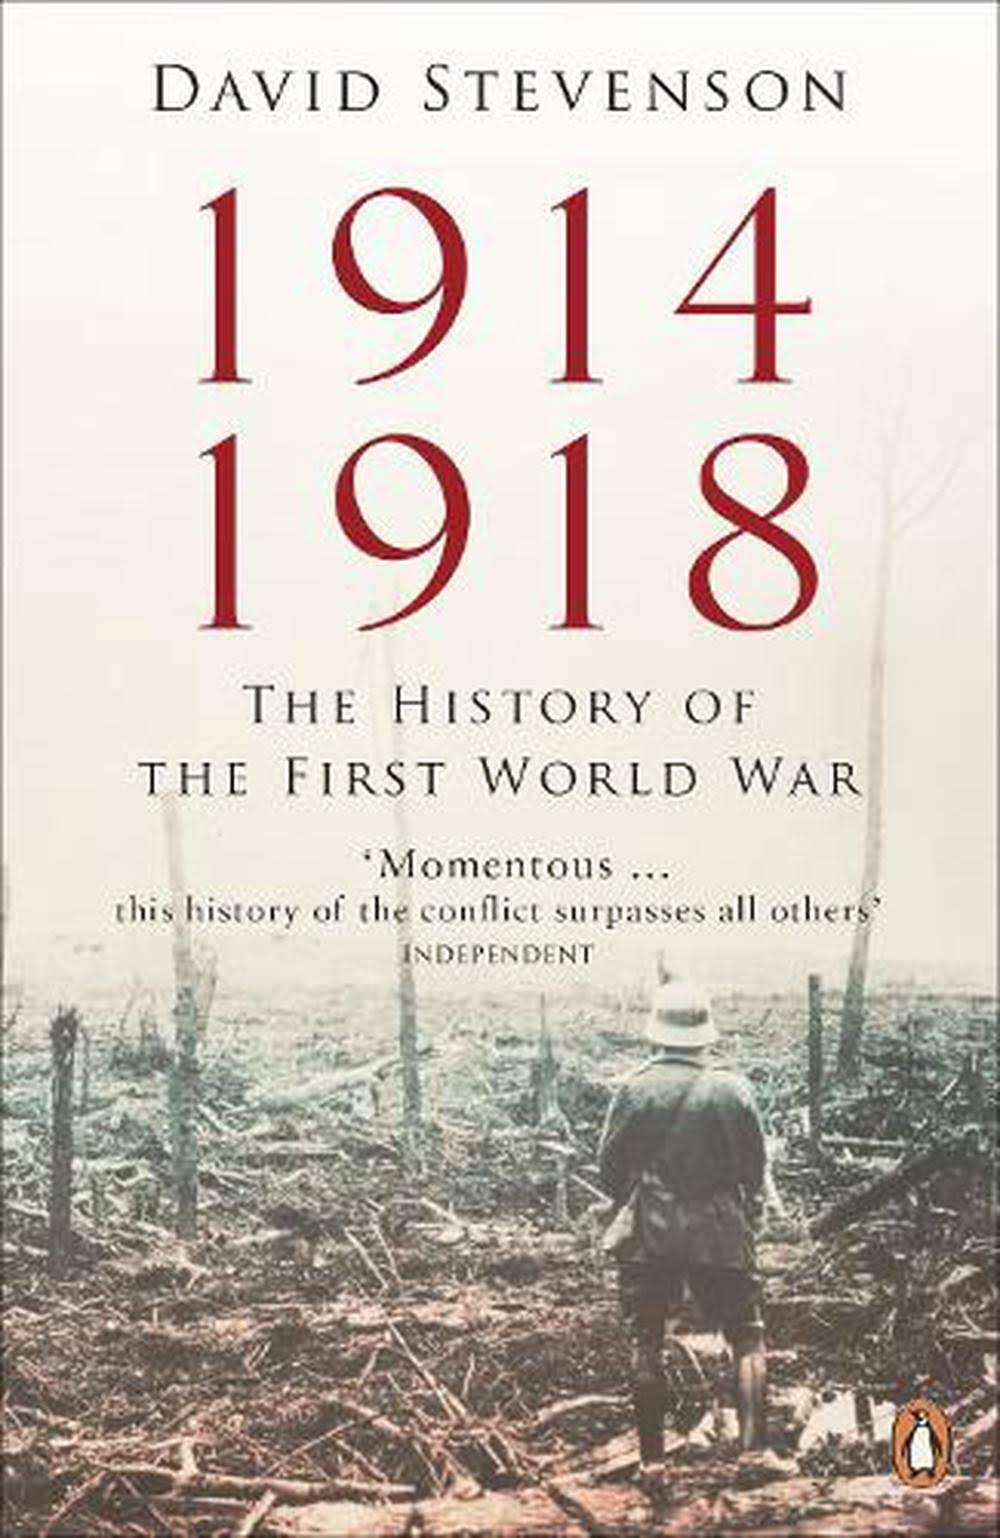 1914-1918: The History of The First World War by David Stevenson